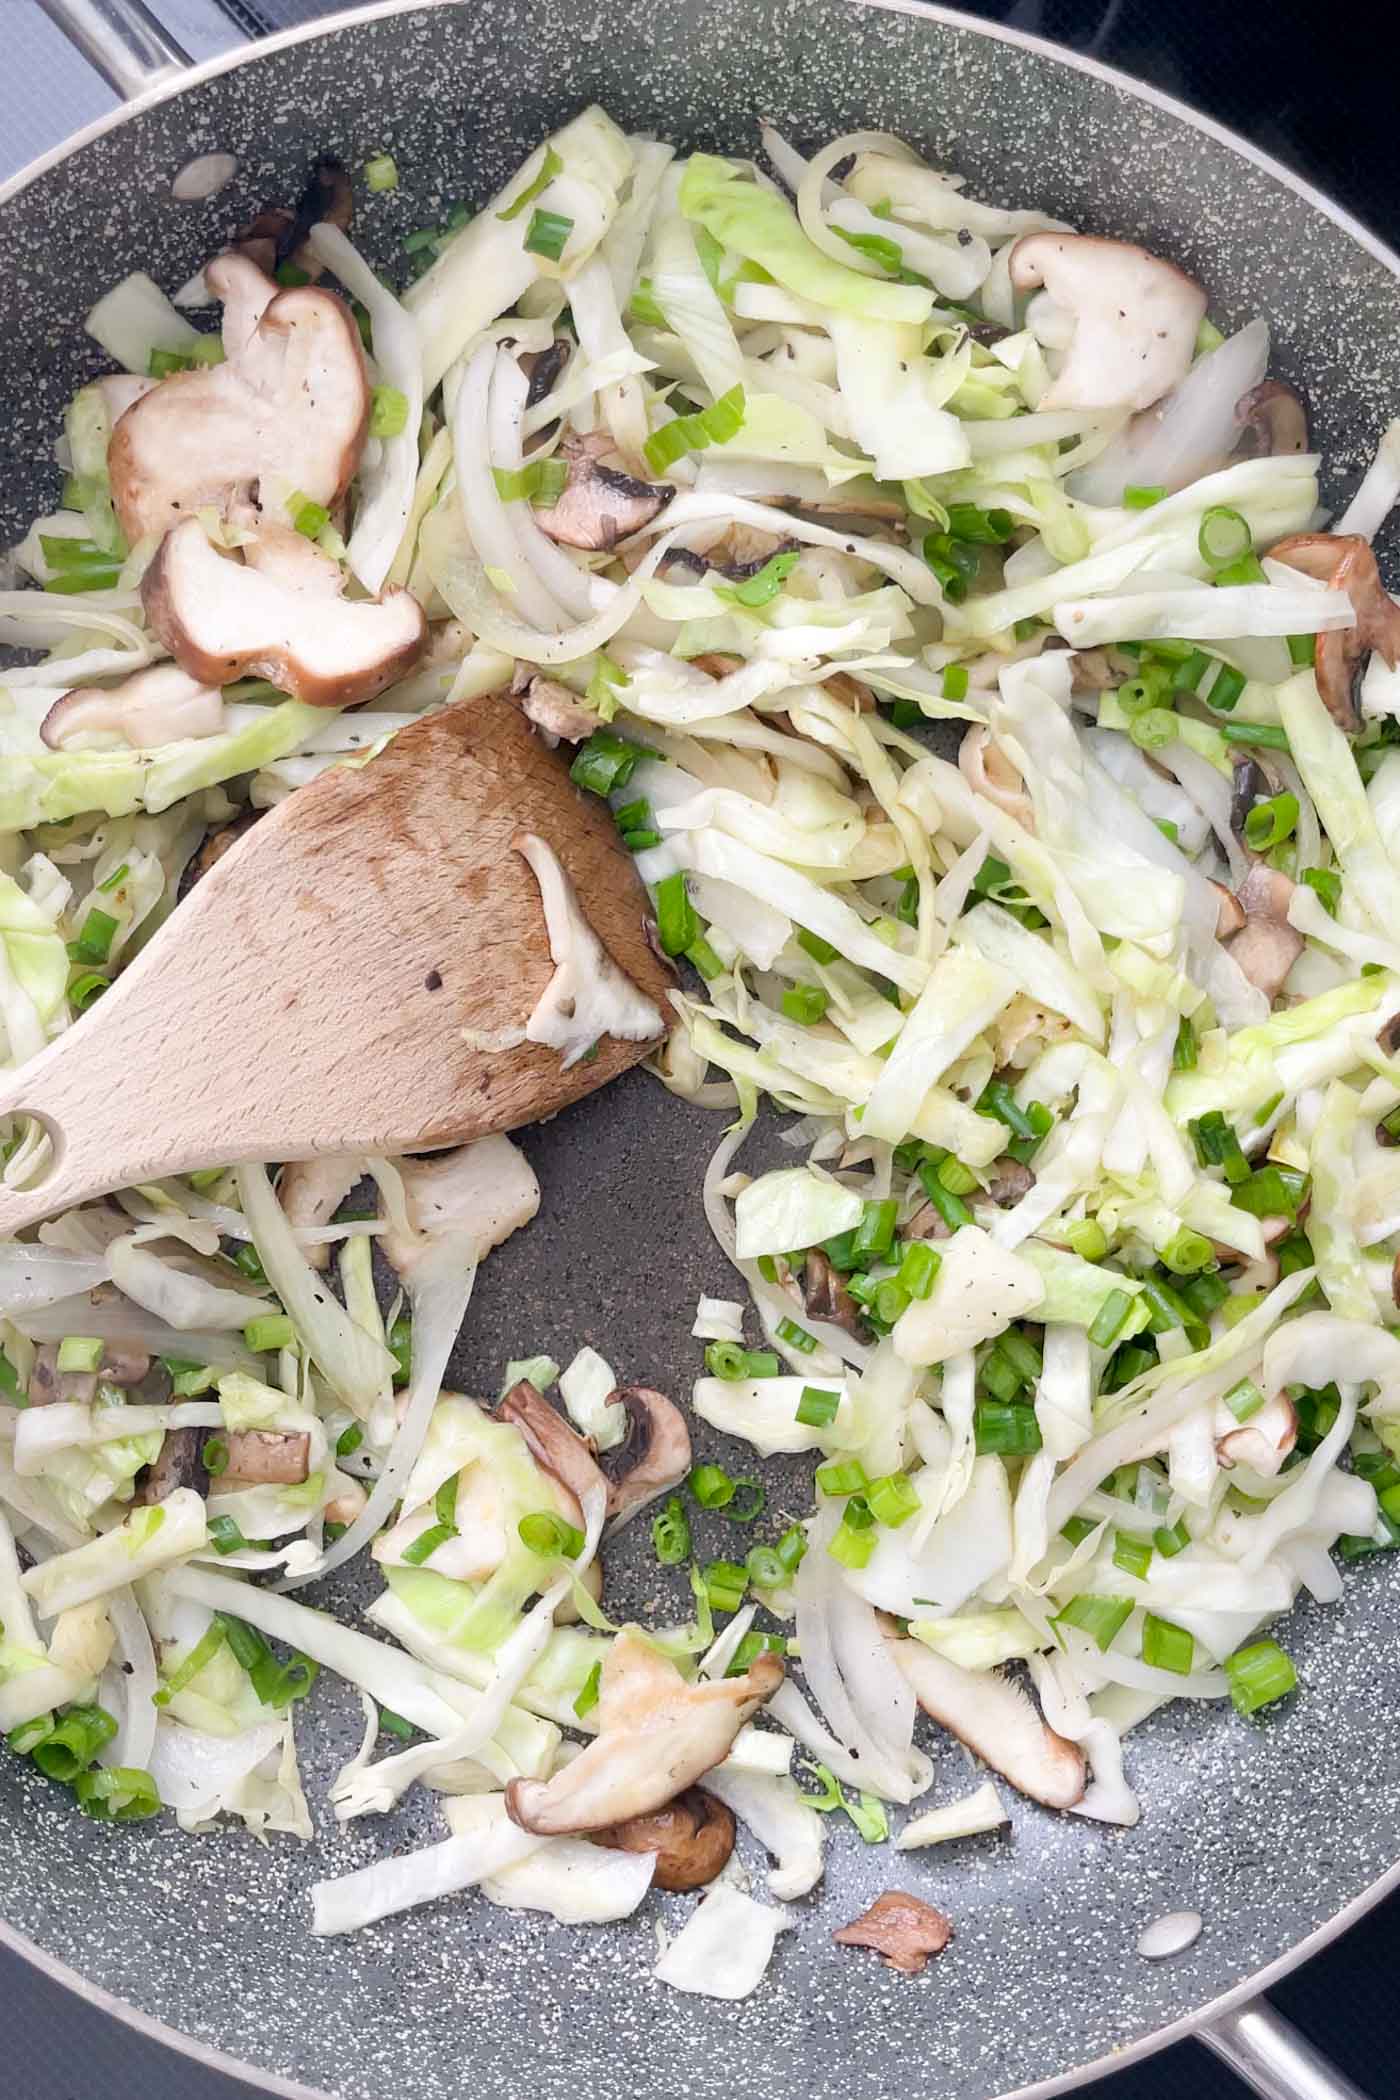 Stir fried cabbage, onion and mushroom cooking in a skillet.